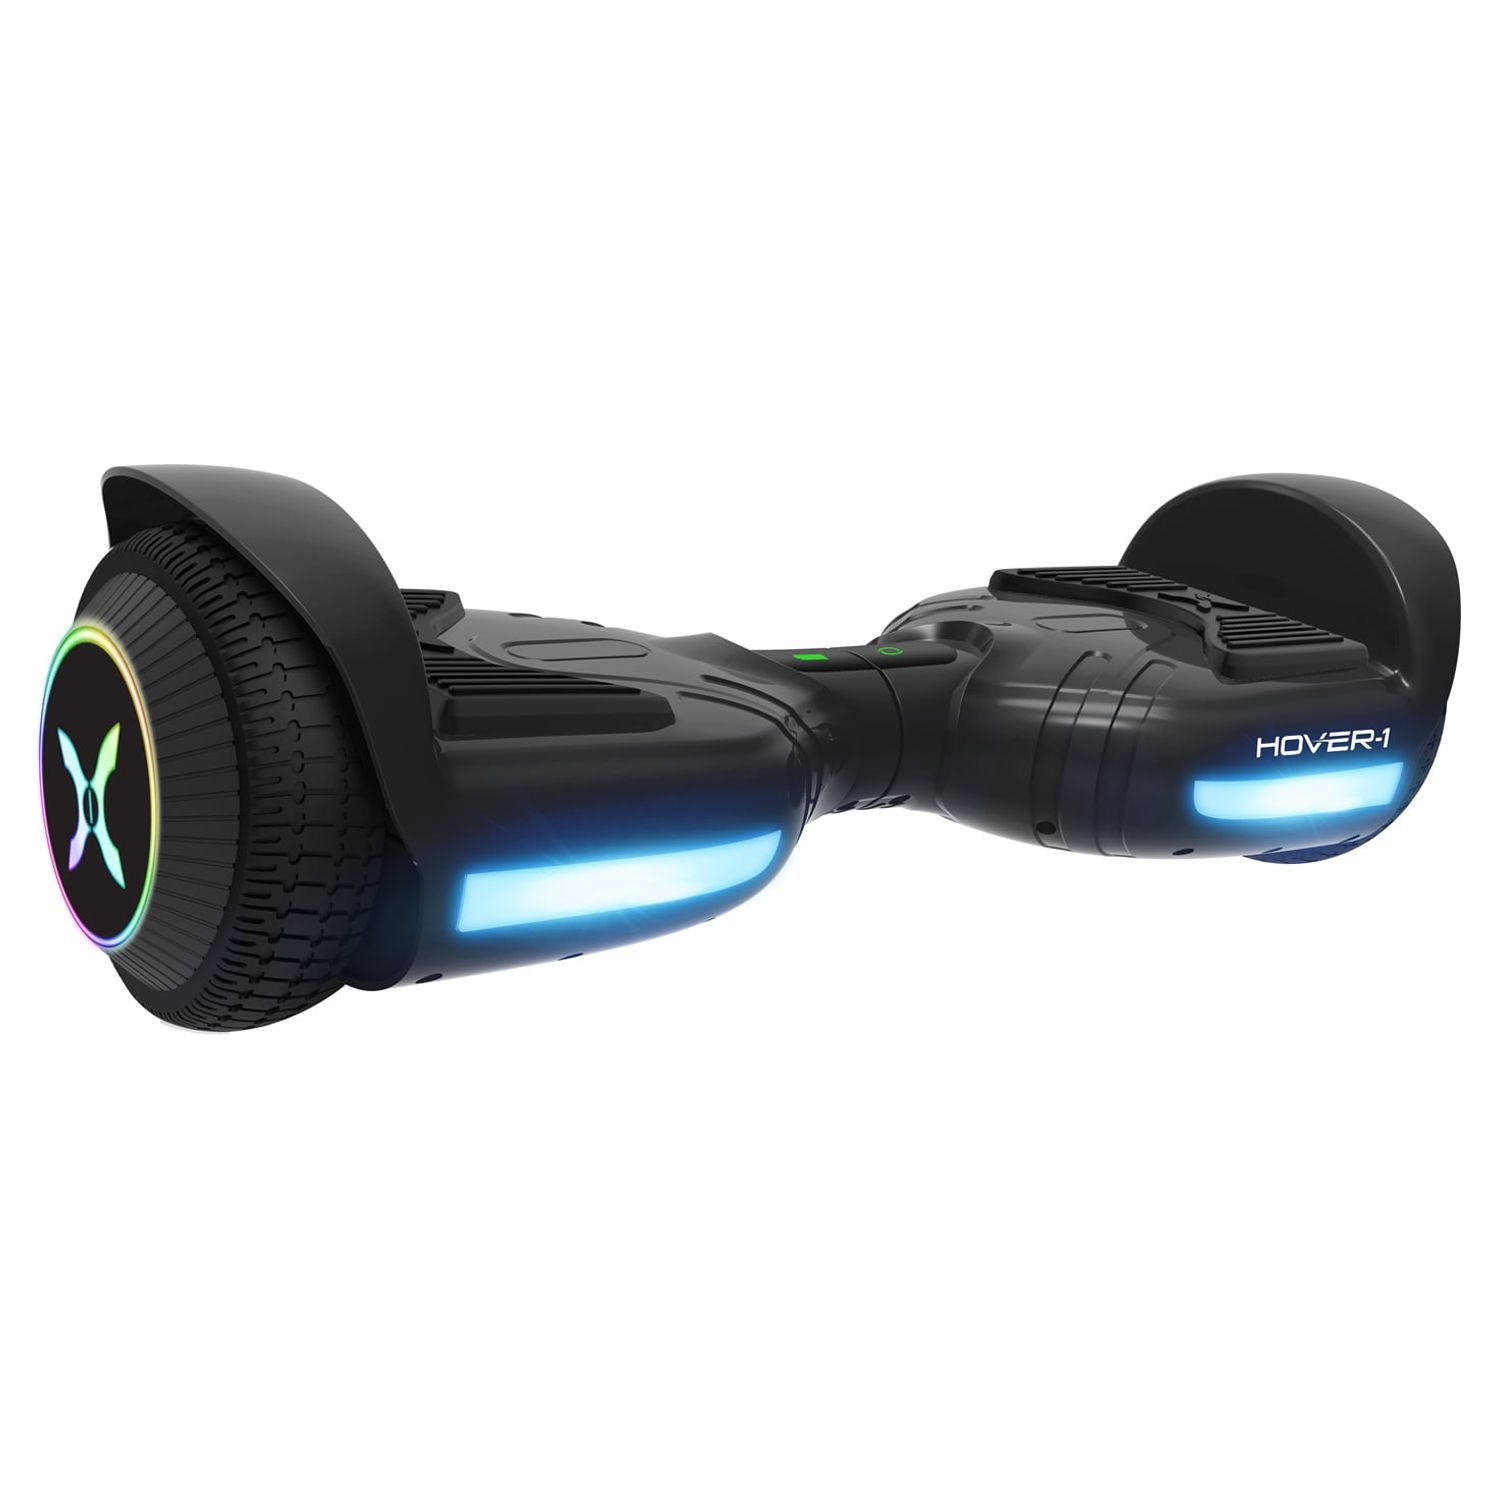 Hover-1 Blast Hoverboard, LED Lights, 160 lbs Max Weight, 7 mph Max Speed, Black - image 2 of 5